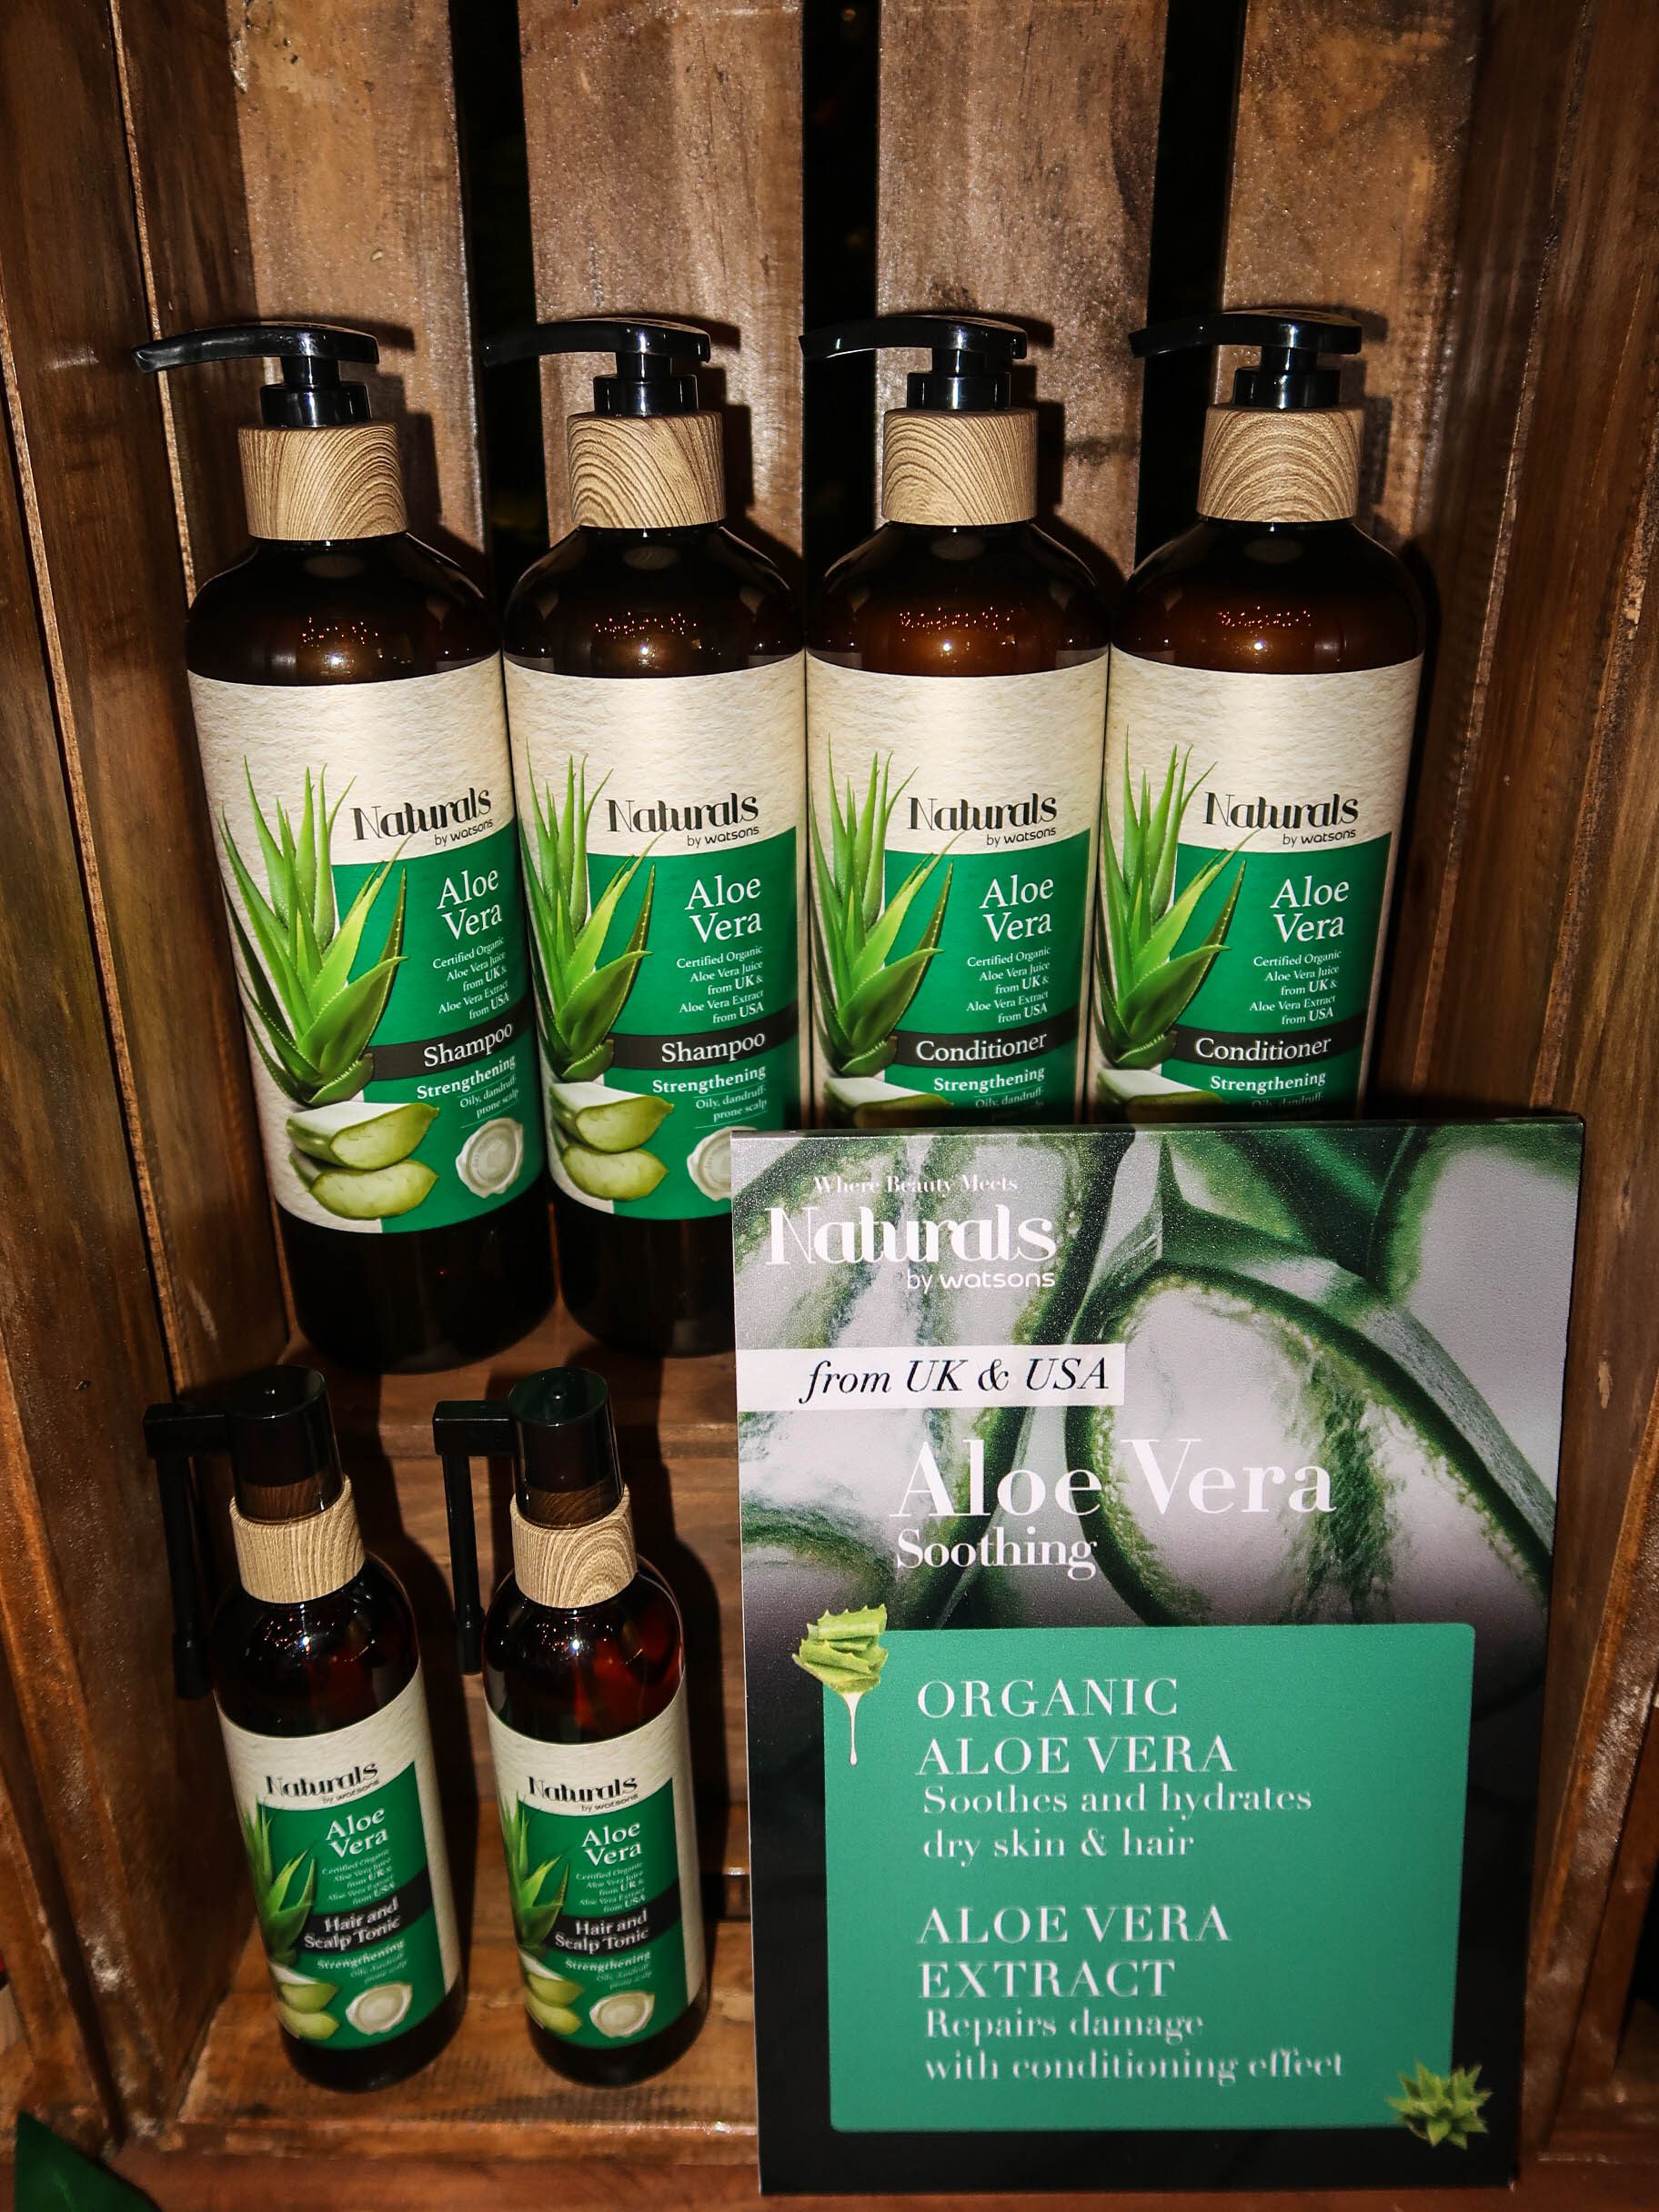 HAIR PROTECTION. Sourced from UK and US, Aloe Vera, best known for its medicinal uses, helps strengthen your hair and gets rid of dandruff.
 